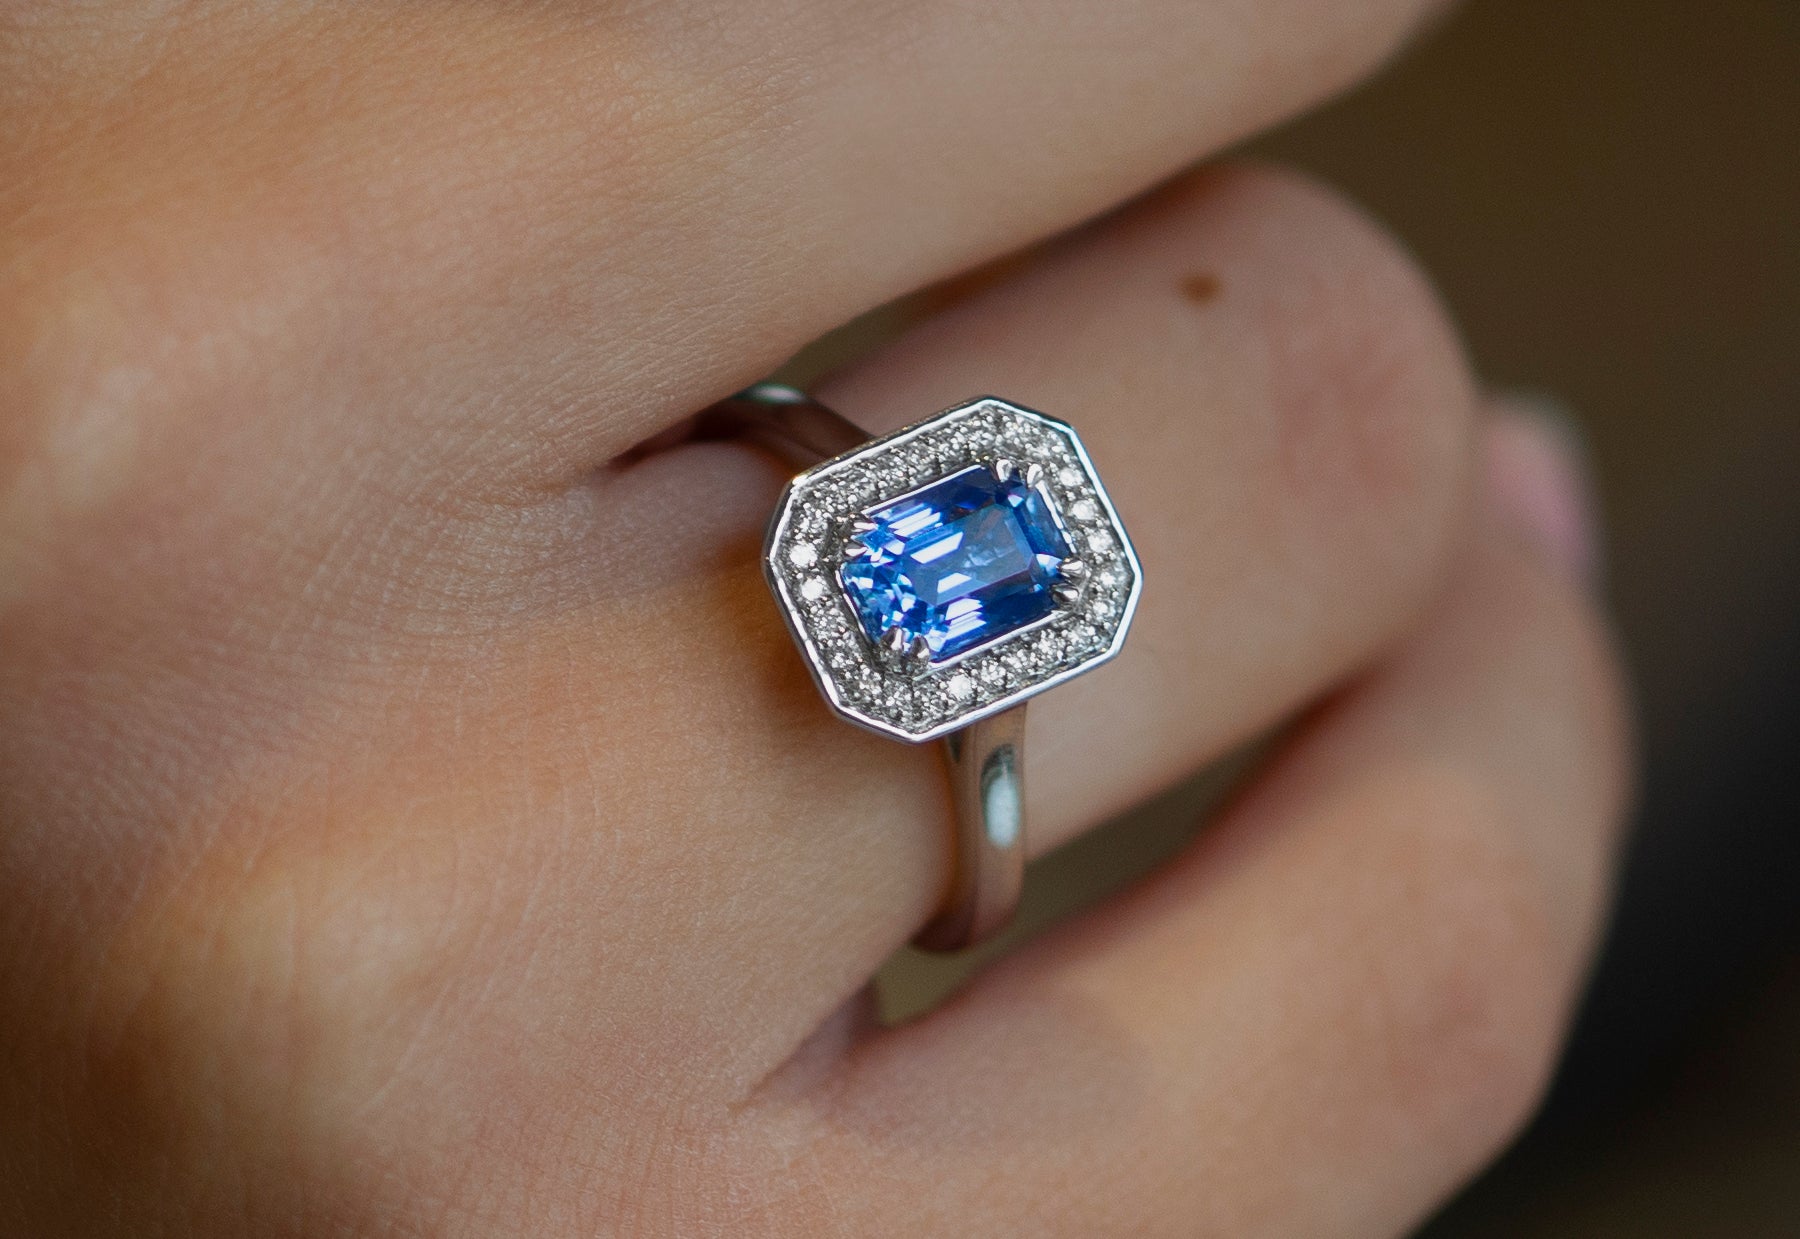 Blue Sapphire Art Deco style engagement ring from Fenton